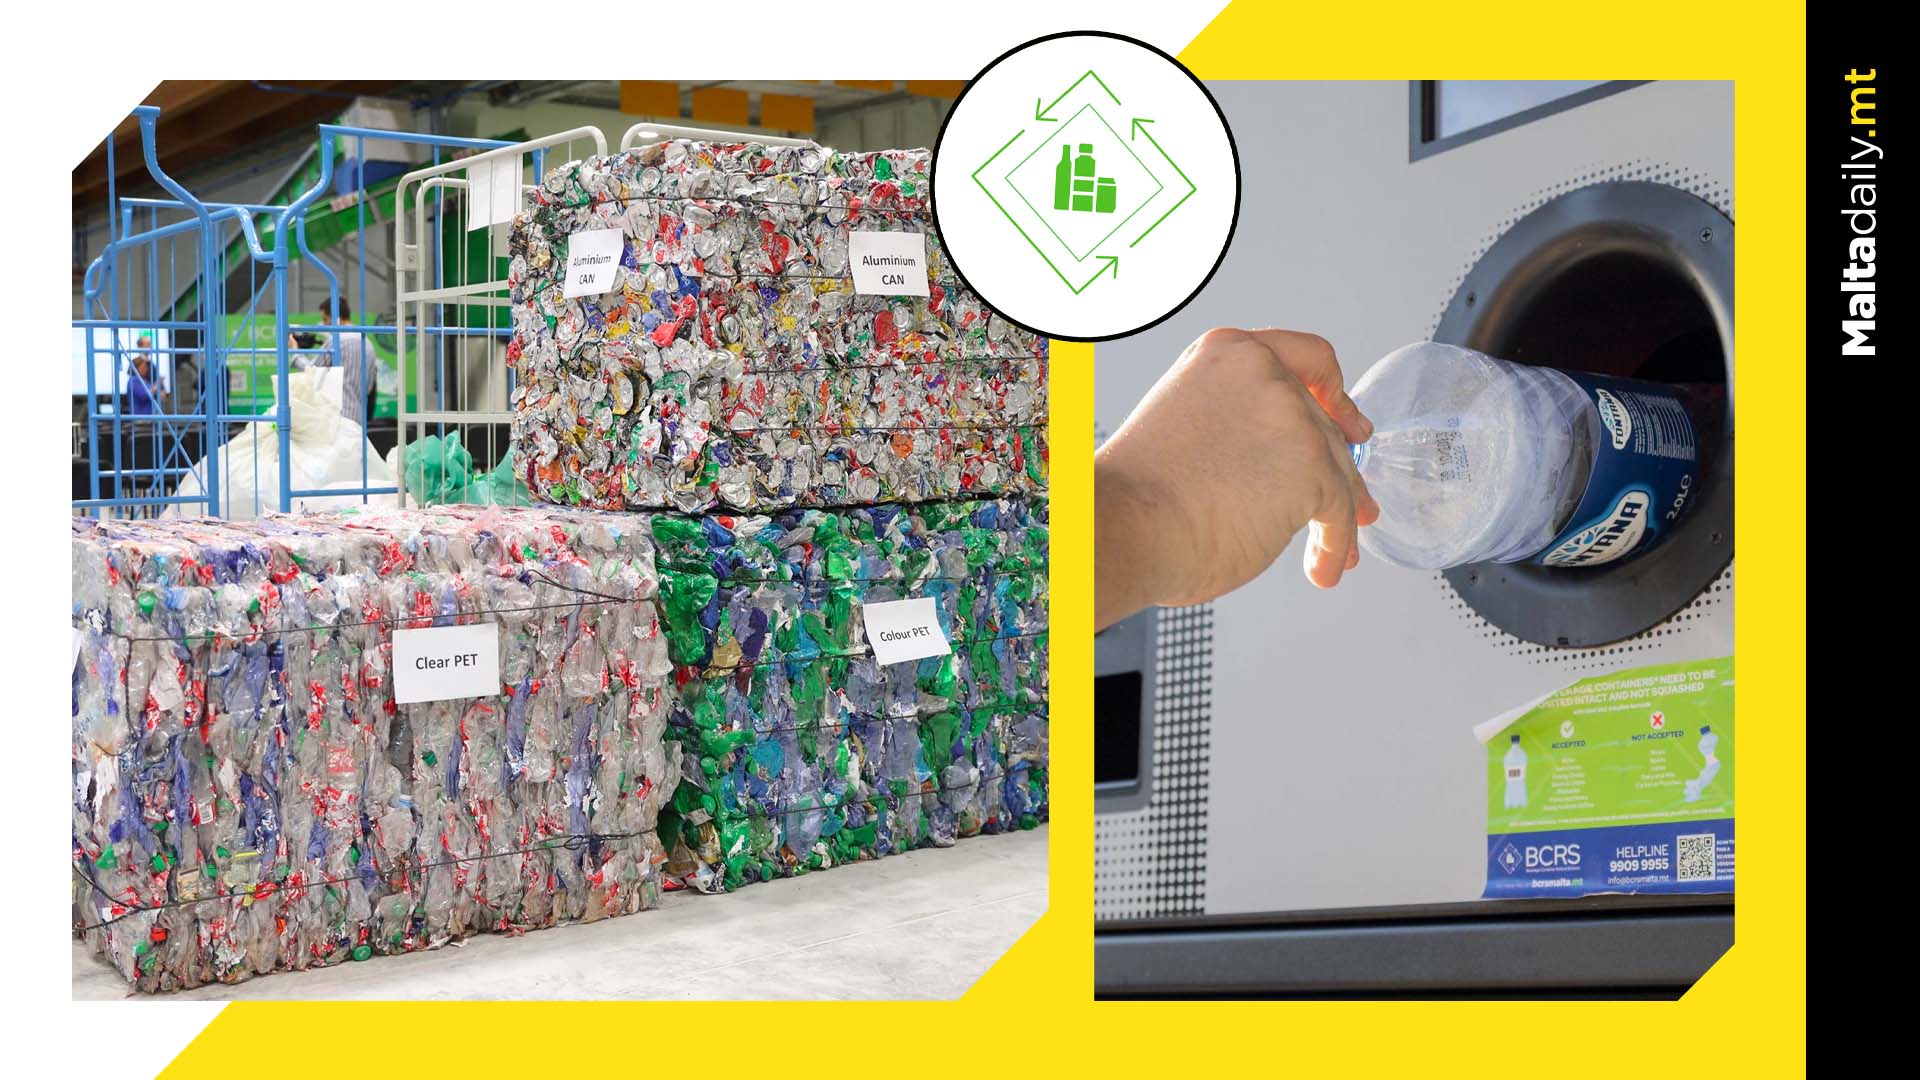 20 million bottles returned for recycling in 2 months